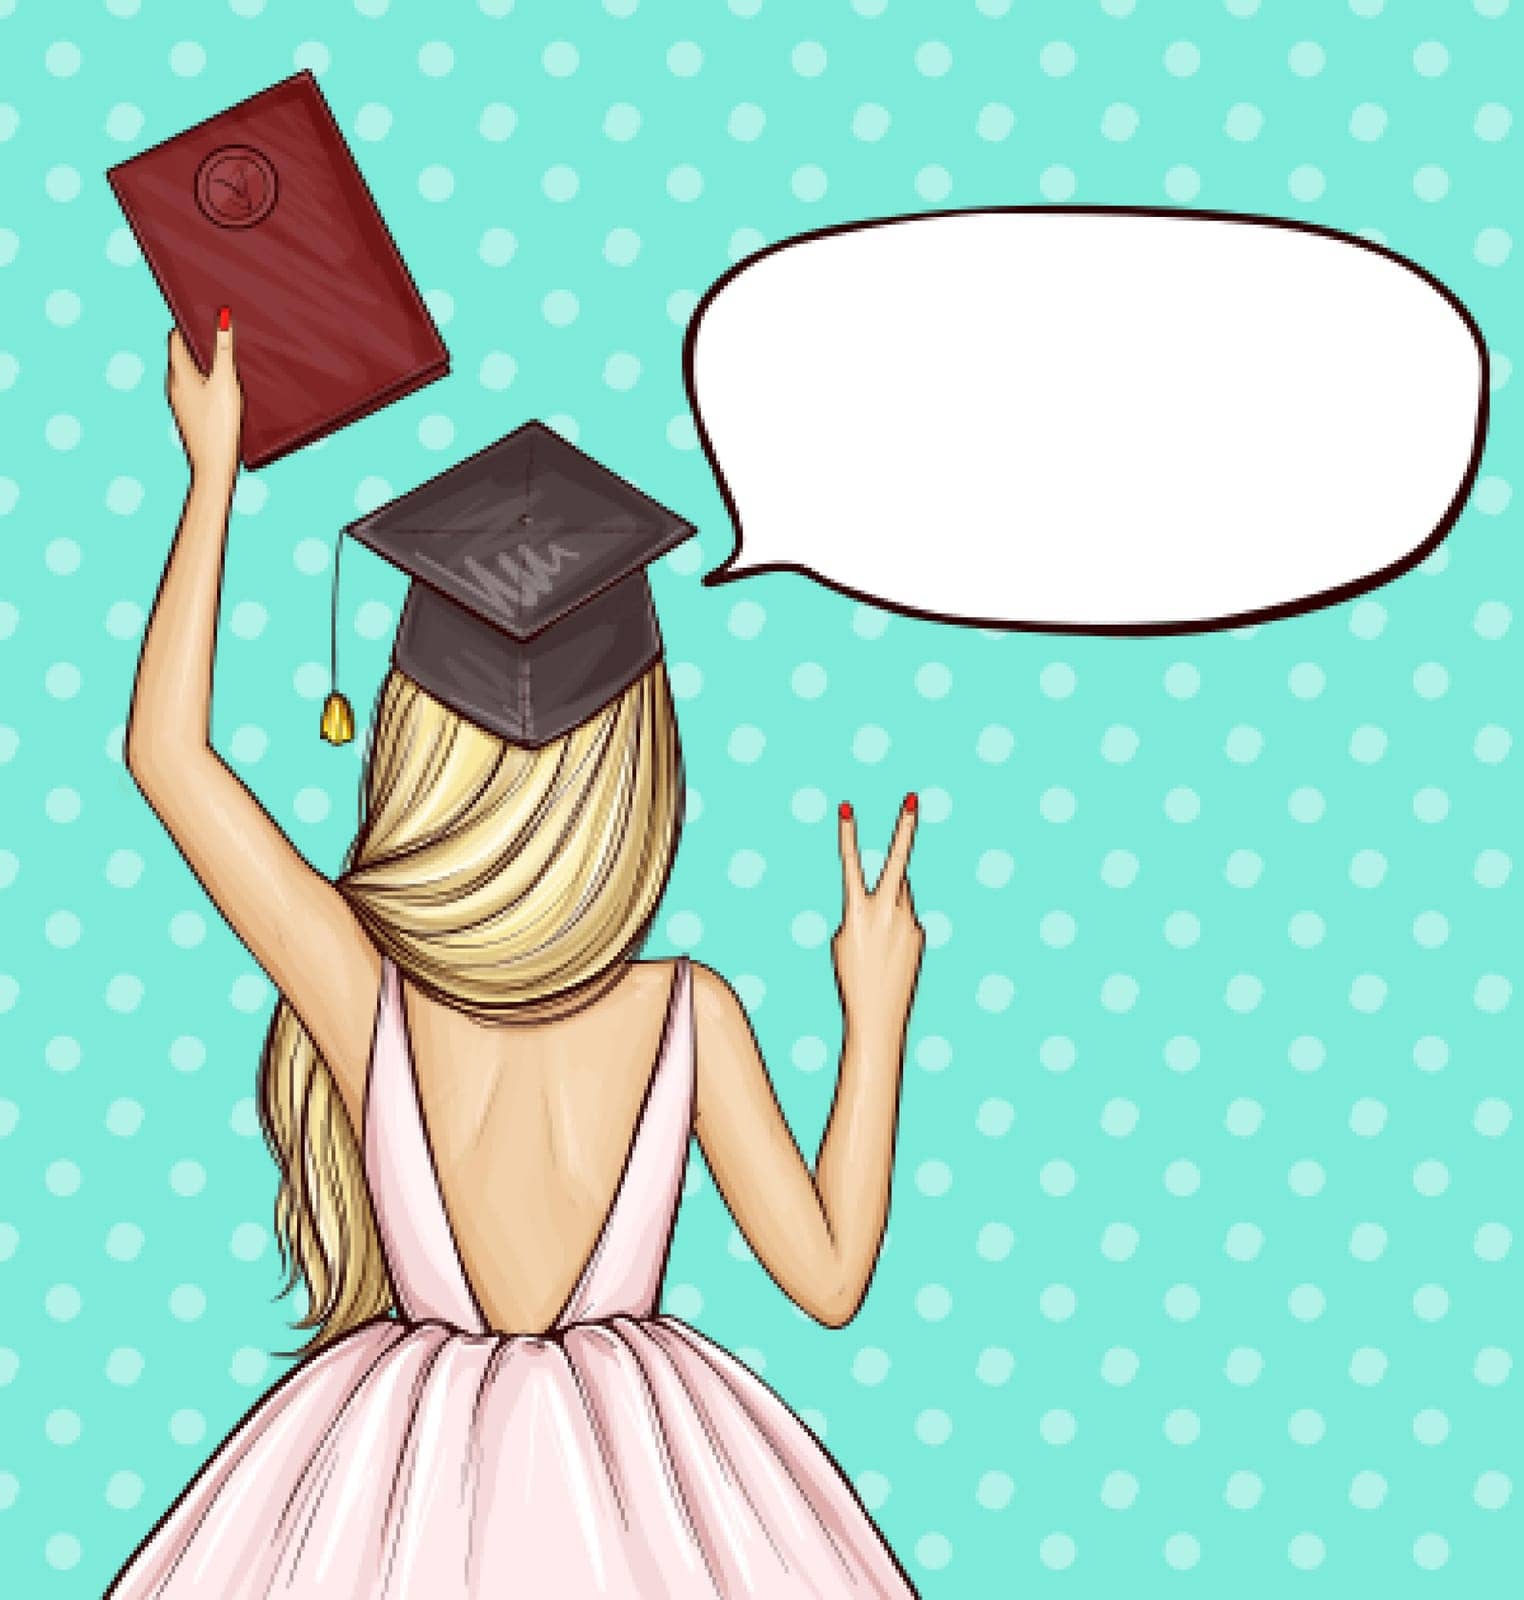 Vector pop art illustration of a young graduate student girl in academic cap with a university diploma in hand, back view. Female shows victory, peace sign. Concept of celebrating the graduation ceremony